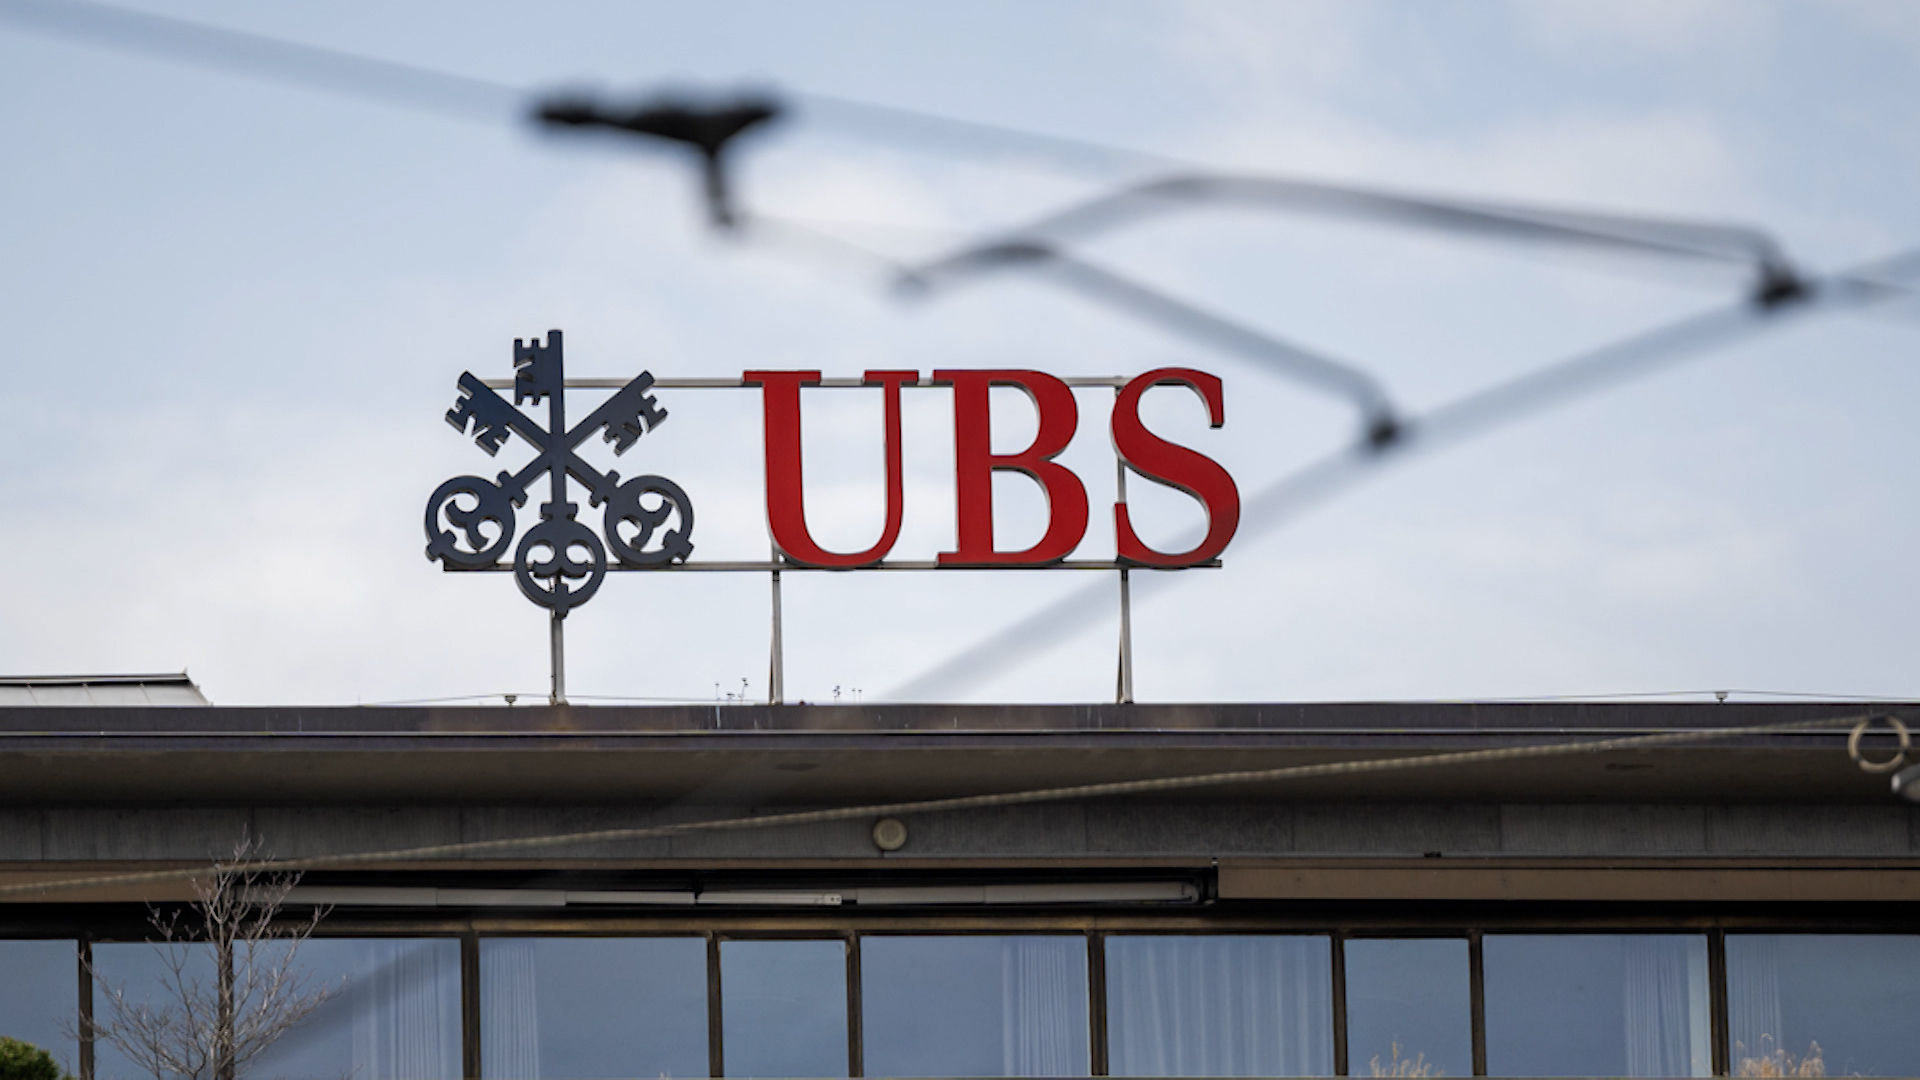 UBS to Buy Credit Suisse to End Crisis